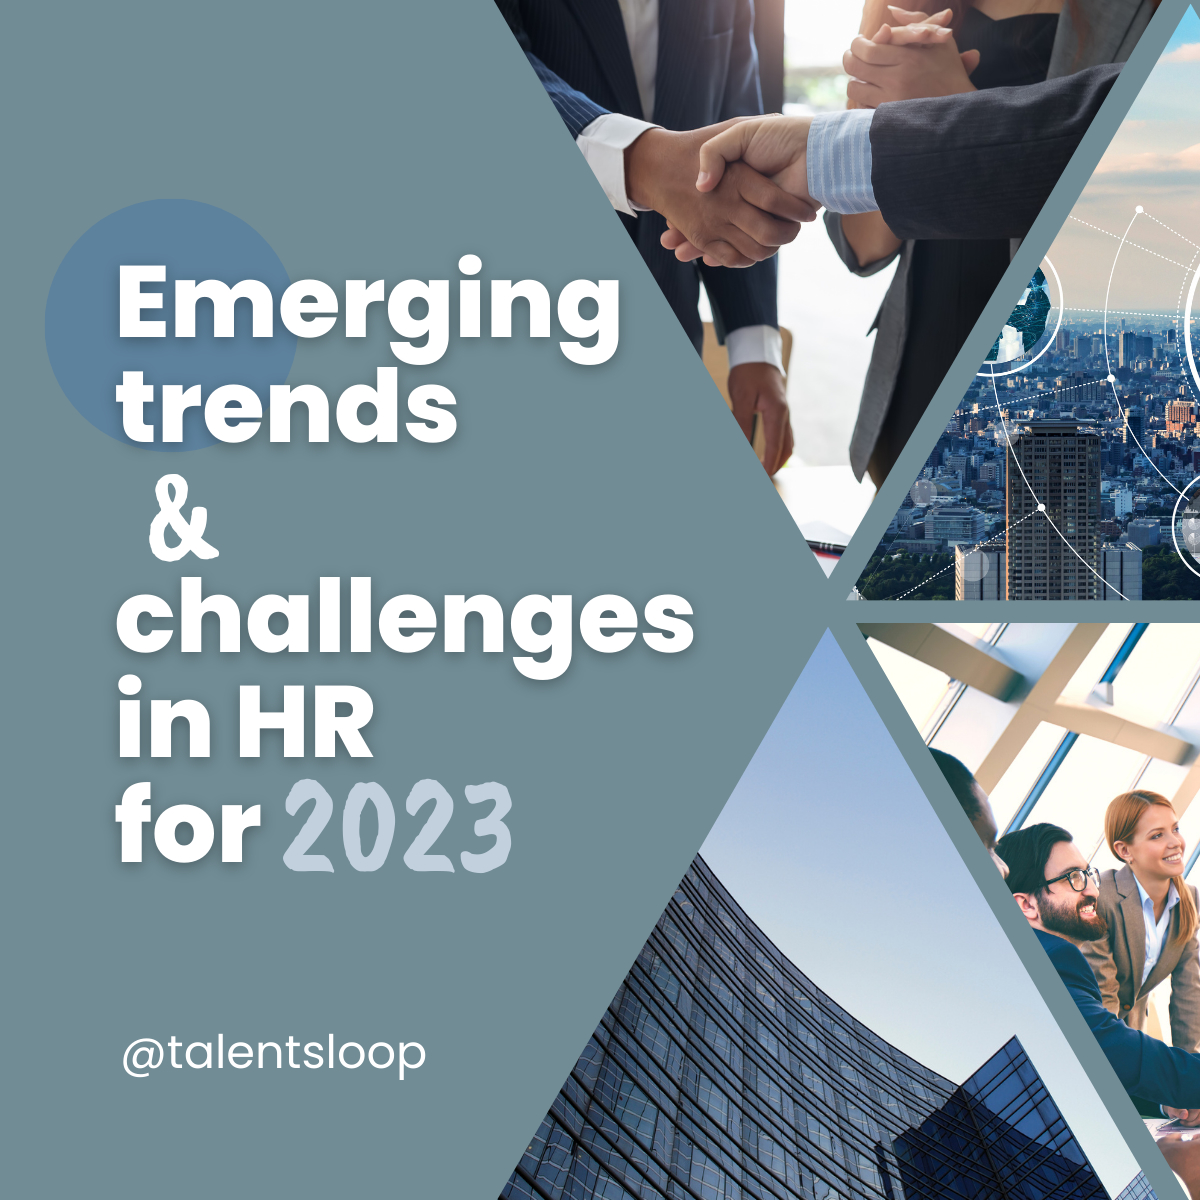 Emerging trends and challenges for HR in 2023